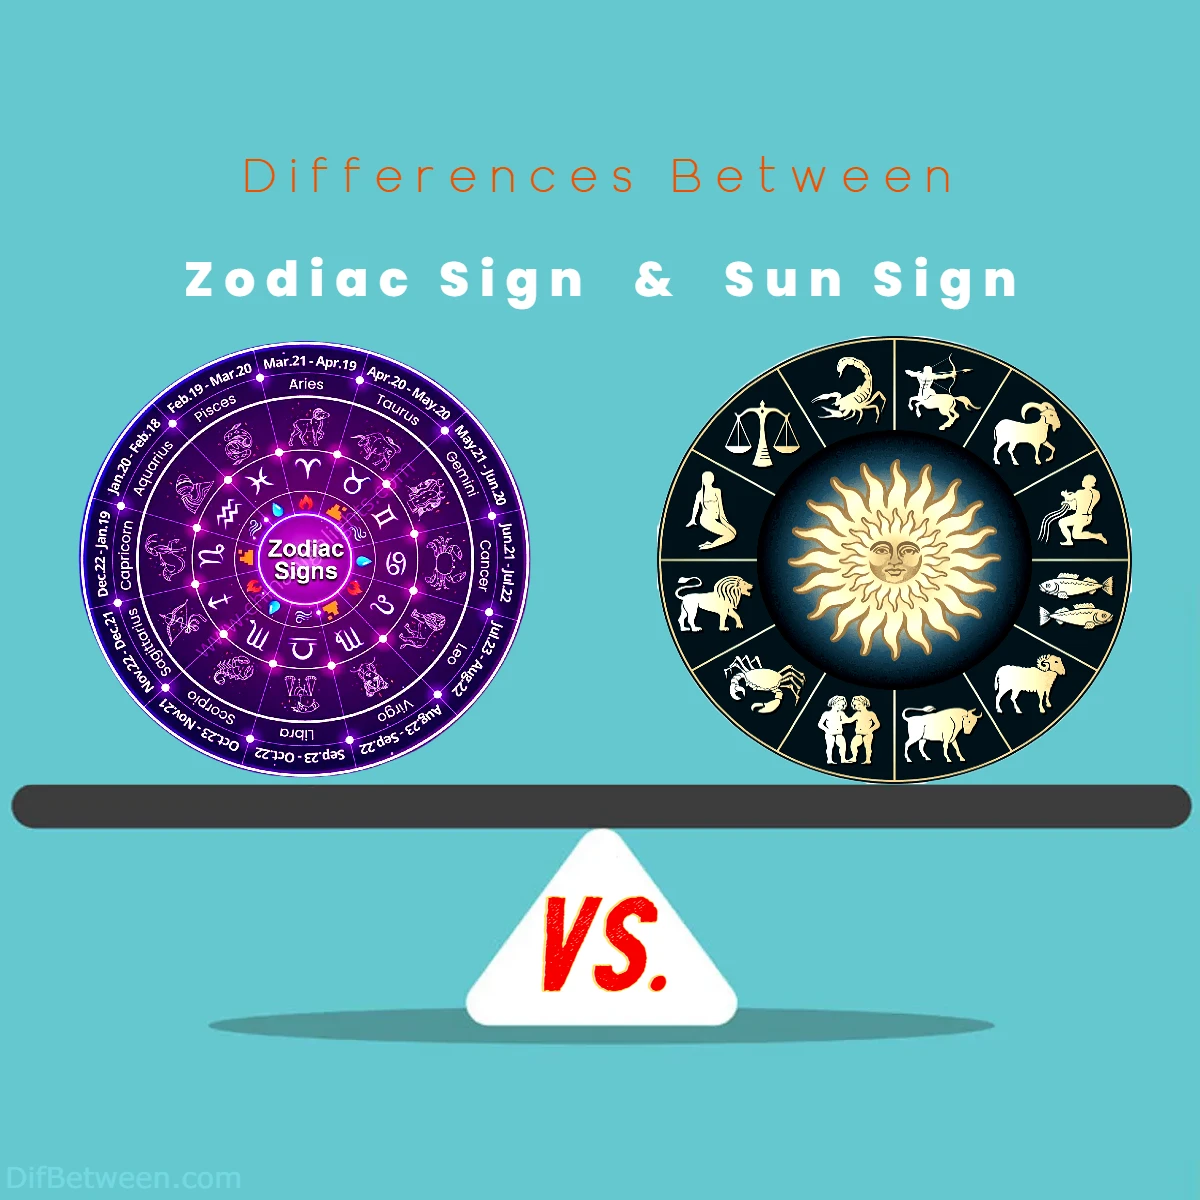 Differences Between Zodiac Sign vs Sun Sign